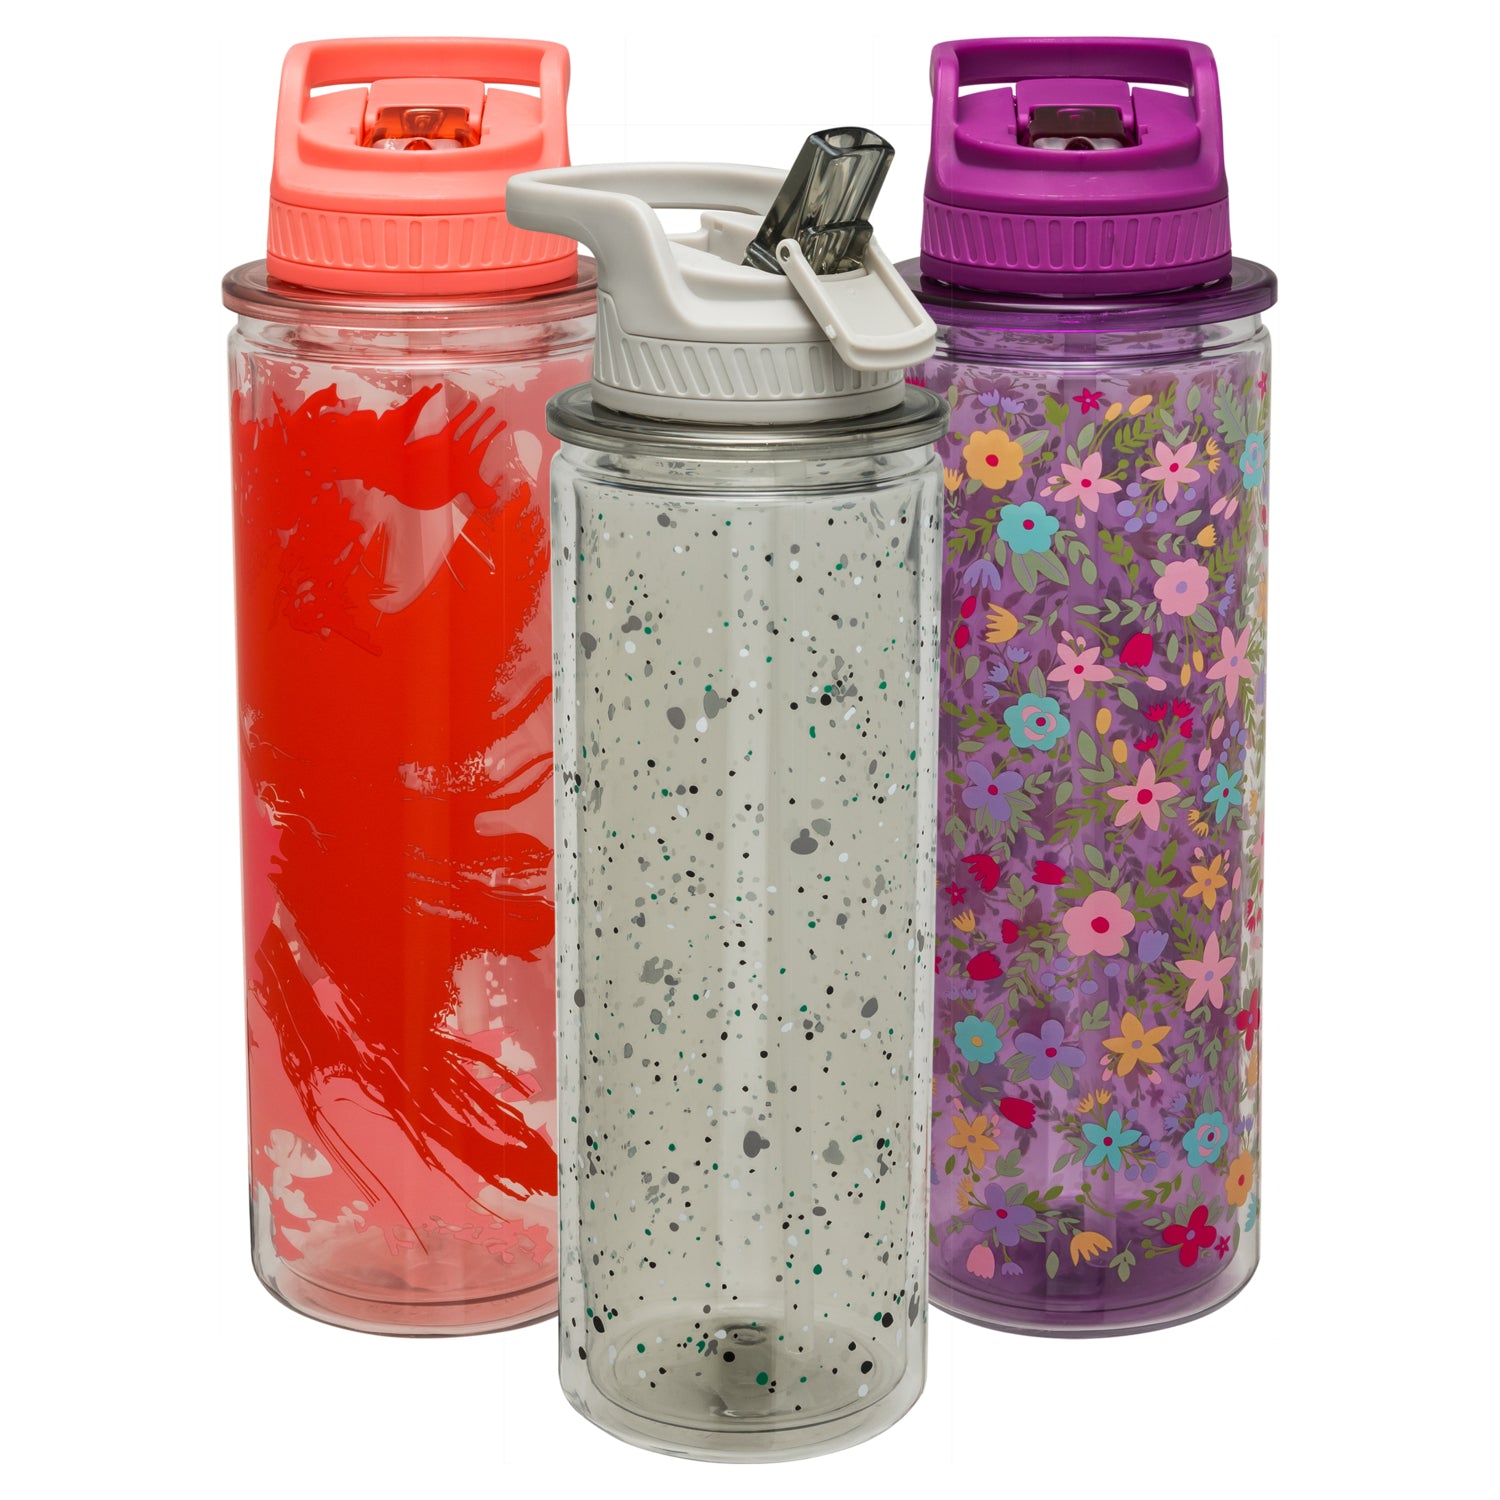 COOL GEAR 3-Pack 32 oz Essence Sipper Water Bottle with Wide Mouth